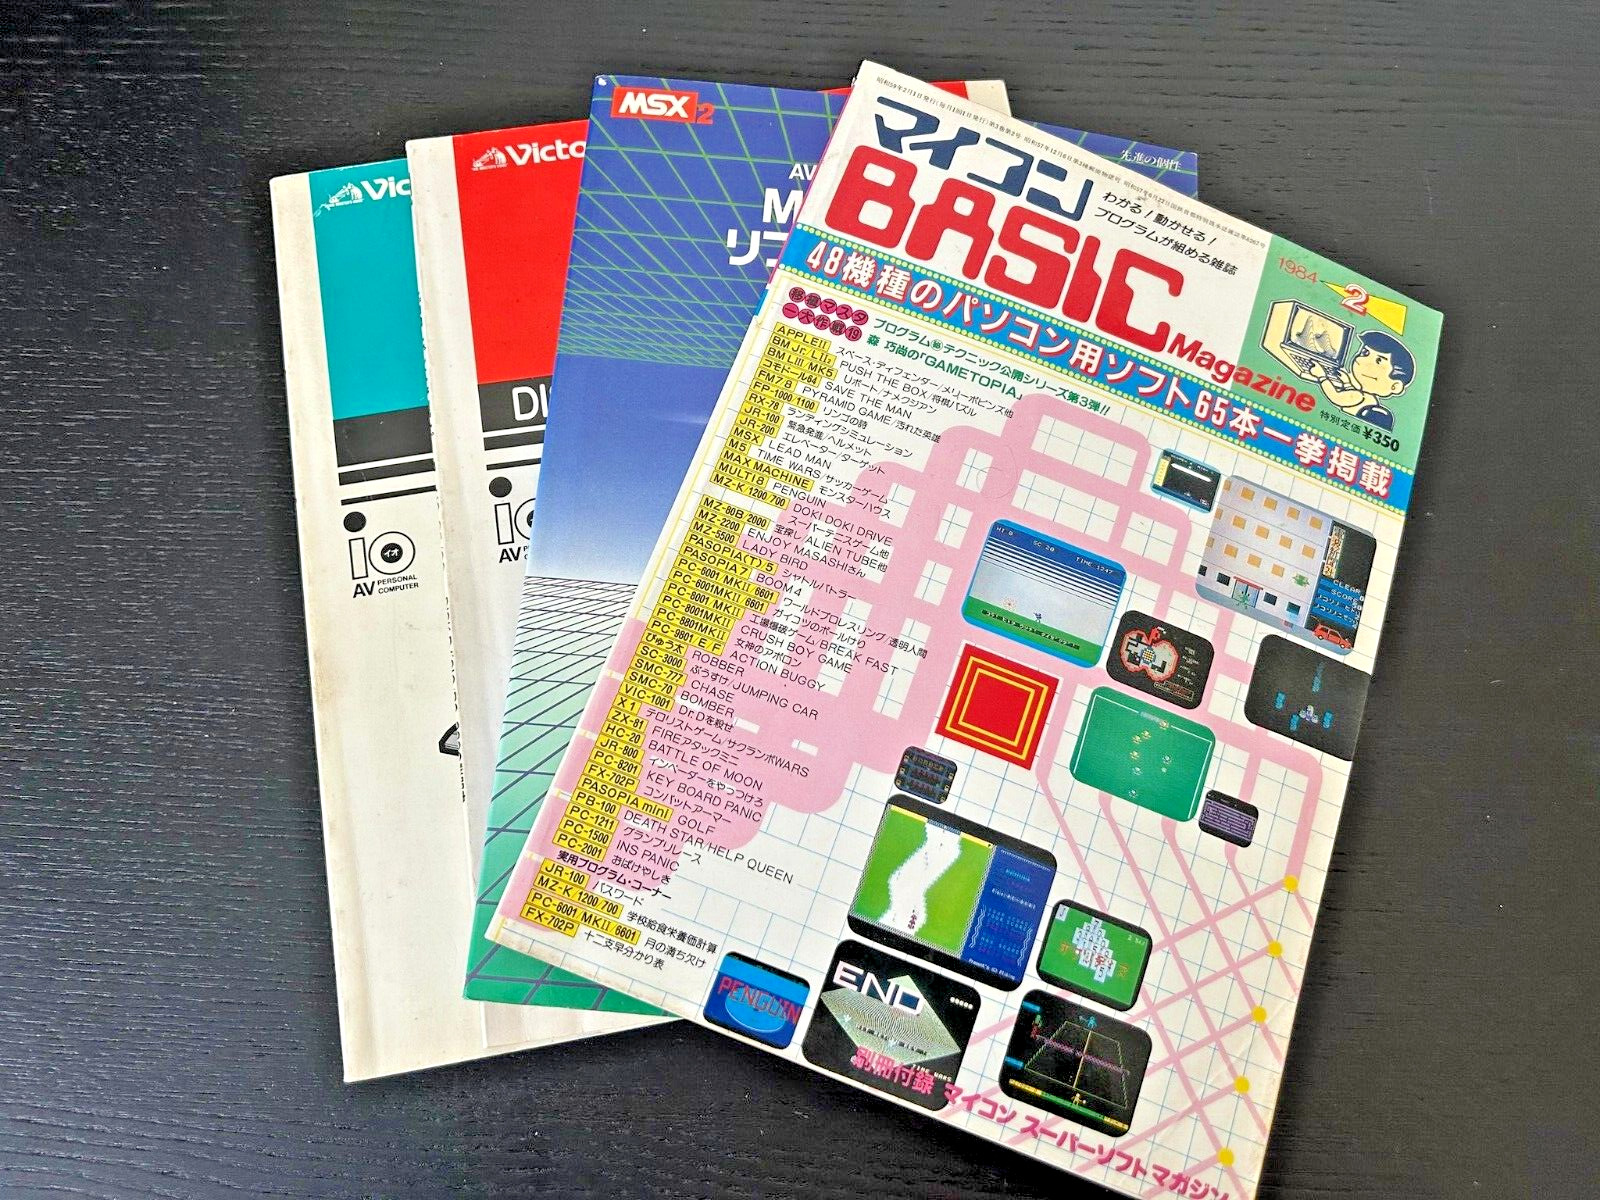 BASIC and MSX Victor HC-95 manuals and Magazine - Japan import, quite rare